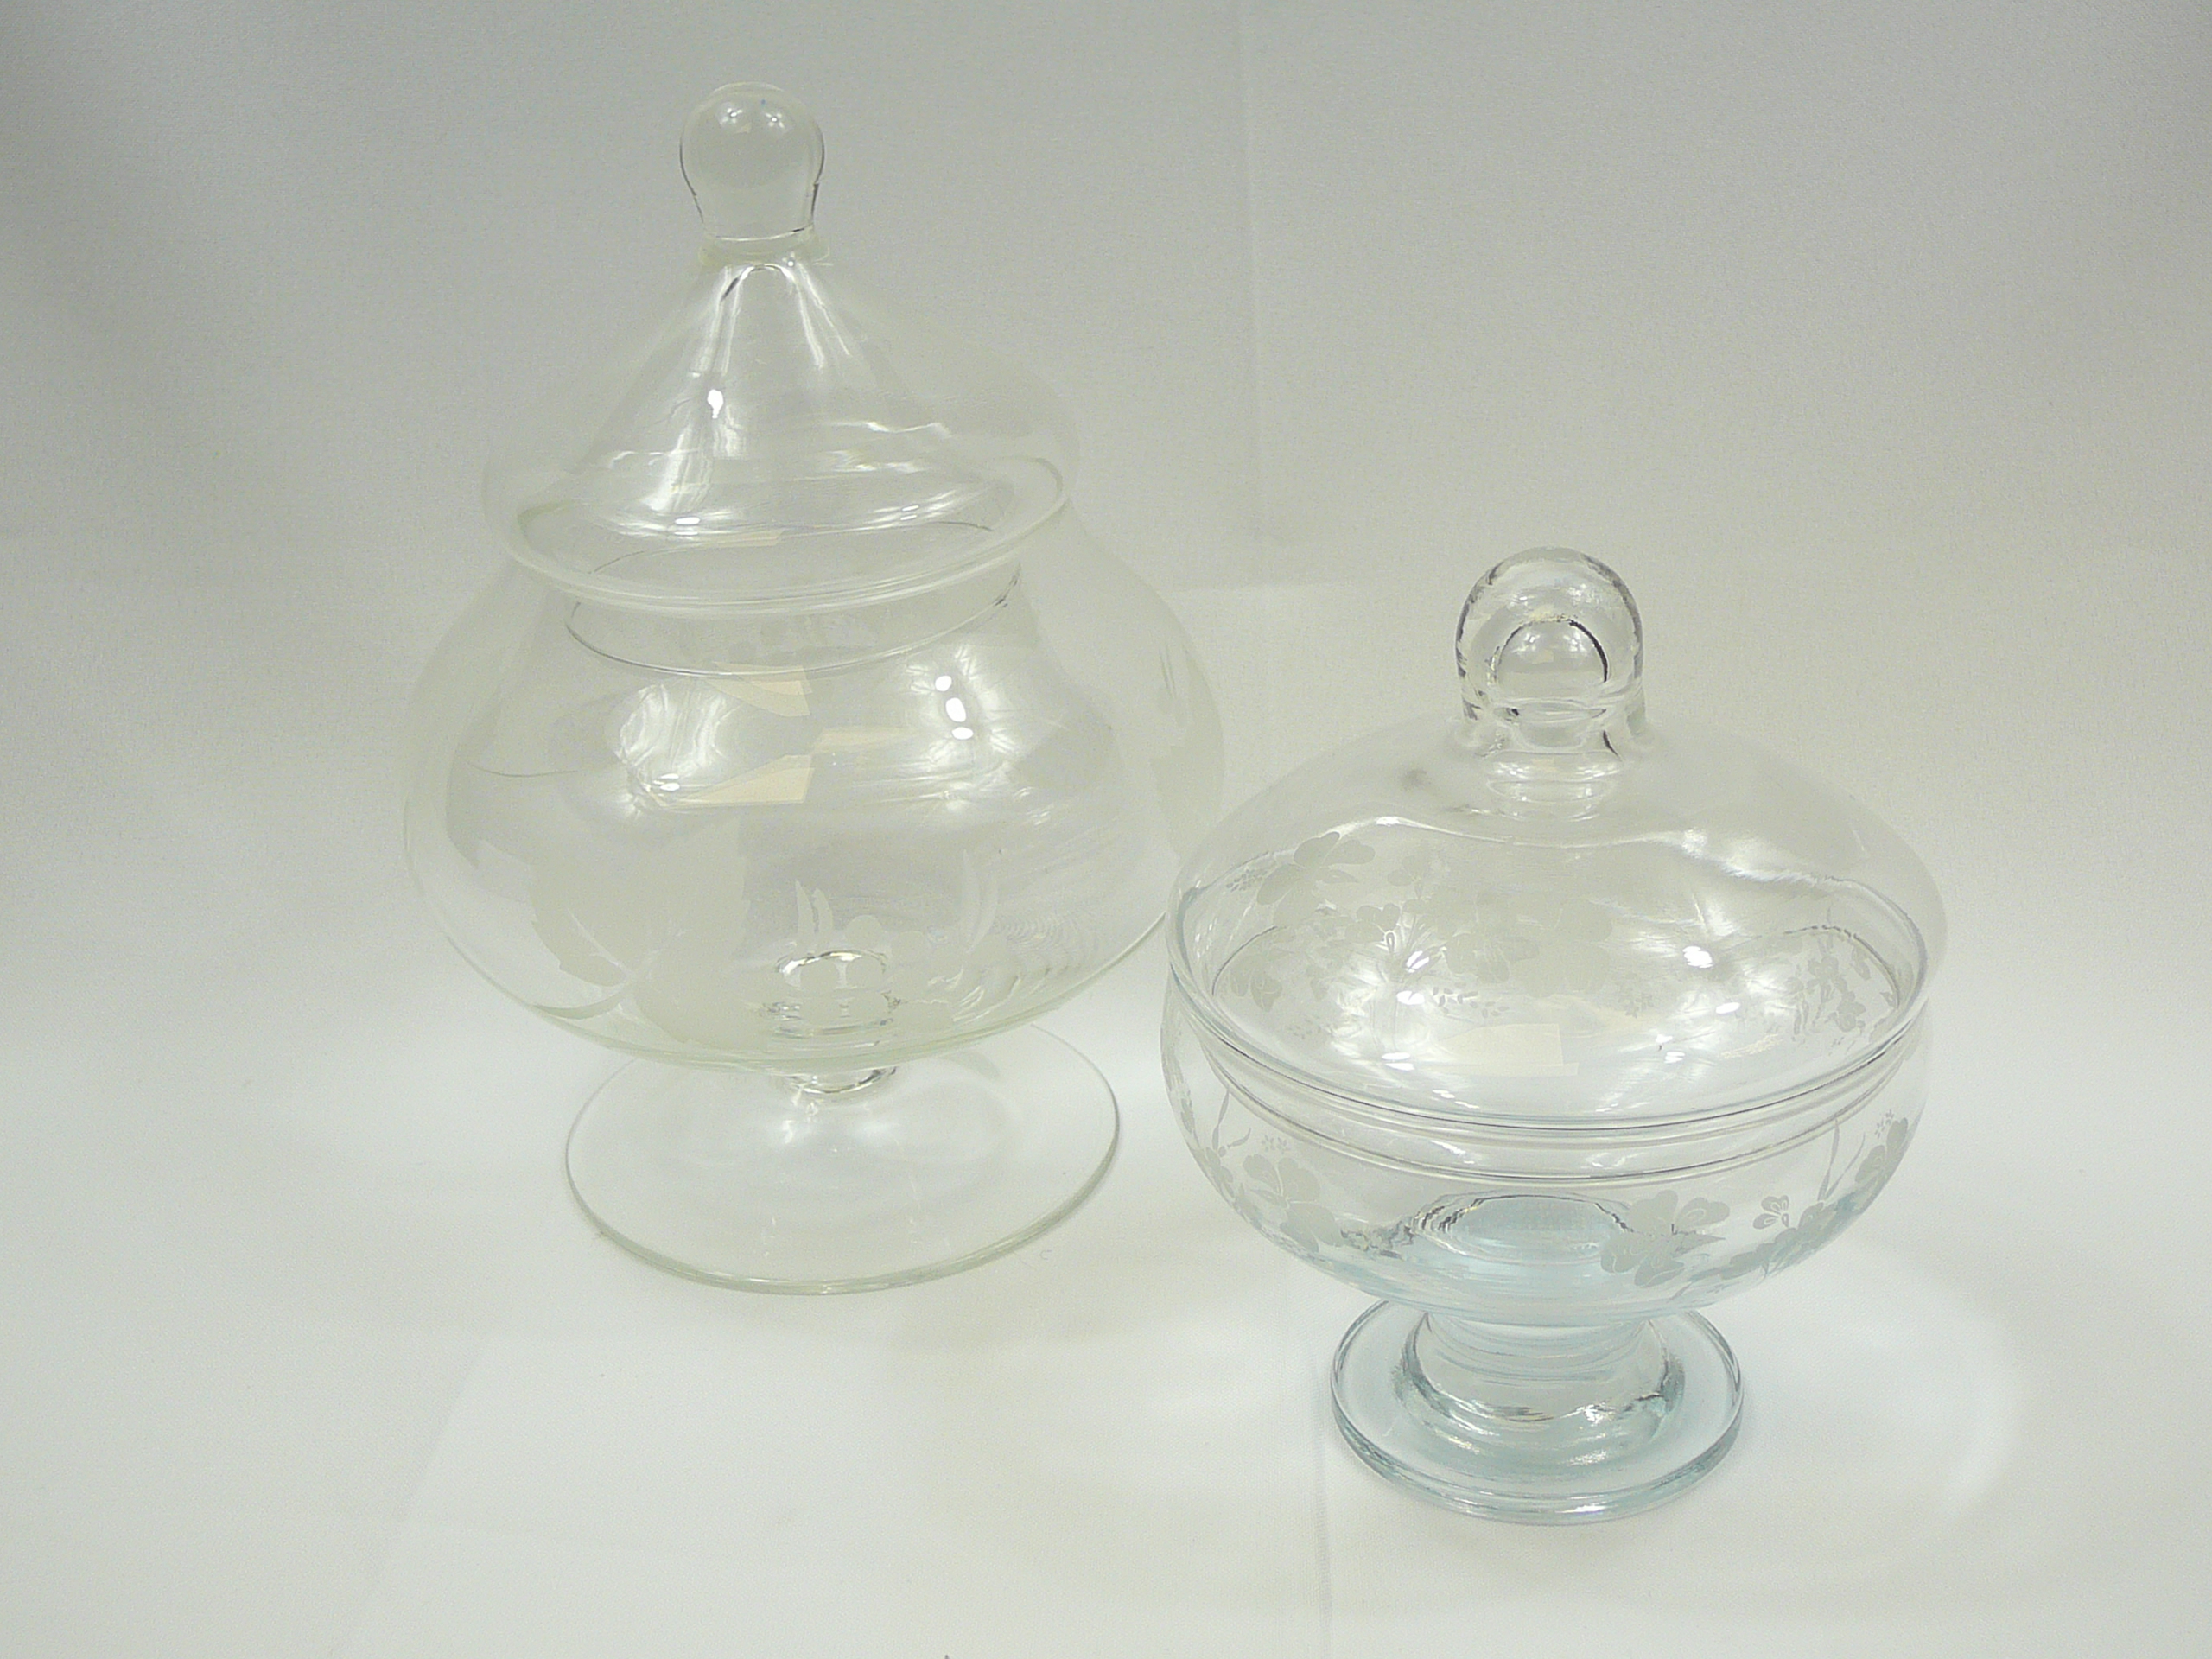 Pair of lidded glass bonbon dishes - Image 2 of 3